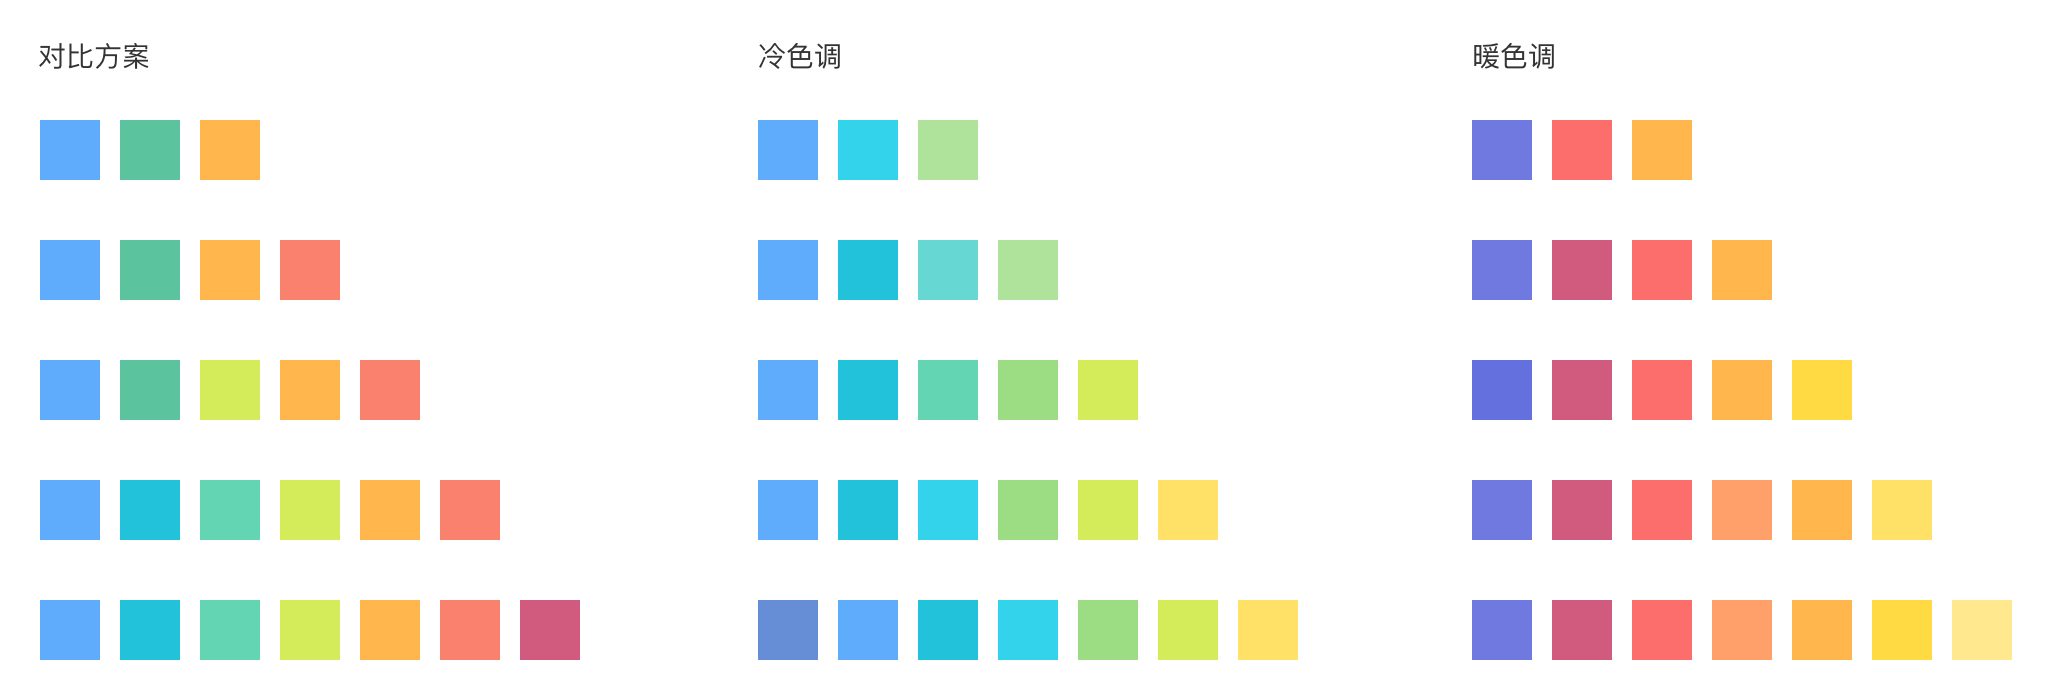 charts_color_img04.png